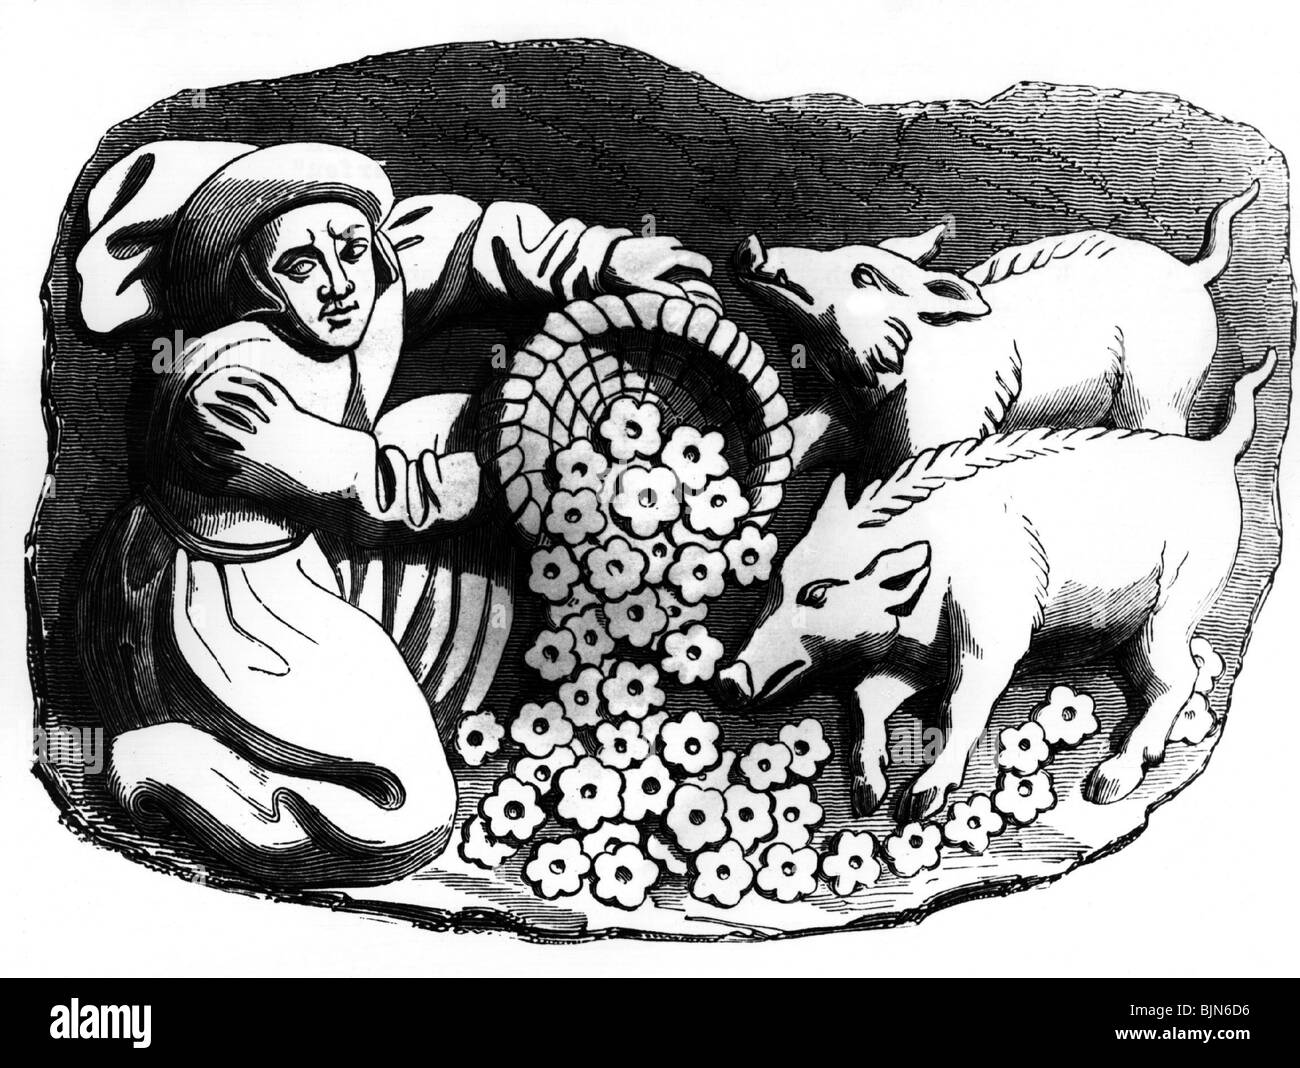 agriculture / farming, rural life, feeding pigs, wood engraving after wood carving, cathedral of Rouen, France, 15th century, historic, historical, fodder, animal food, animals, Middle Ages, medieval, Stock Photo